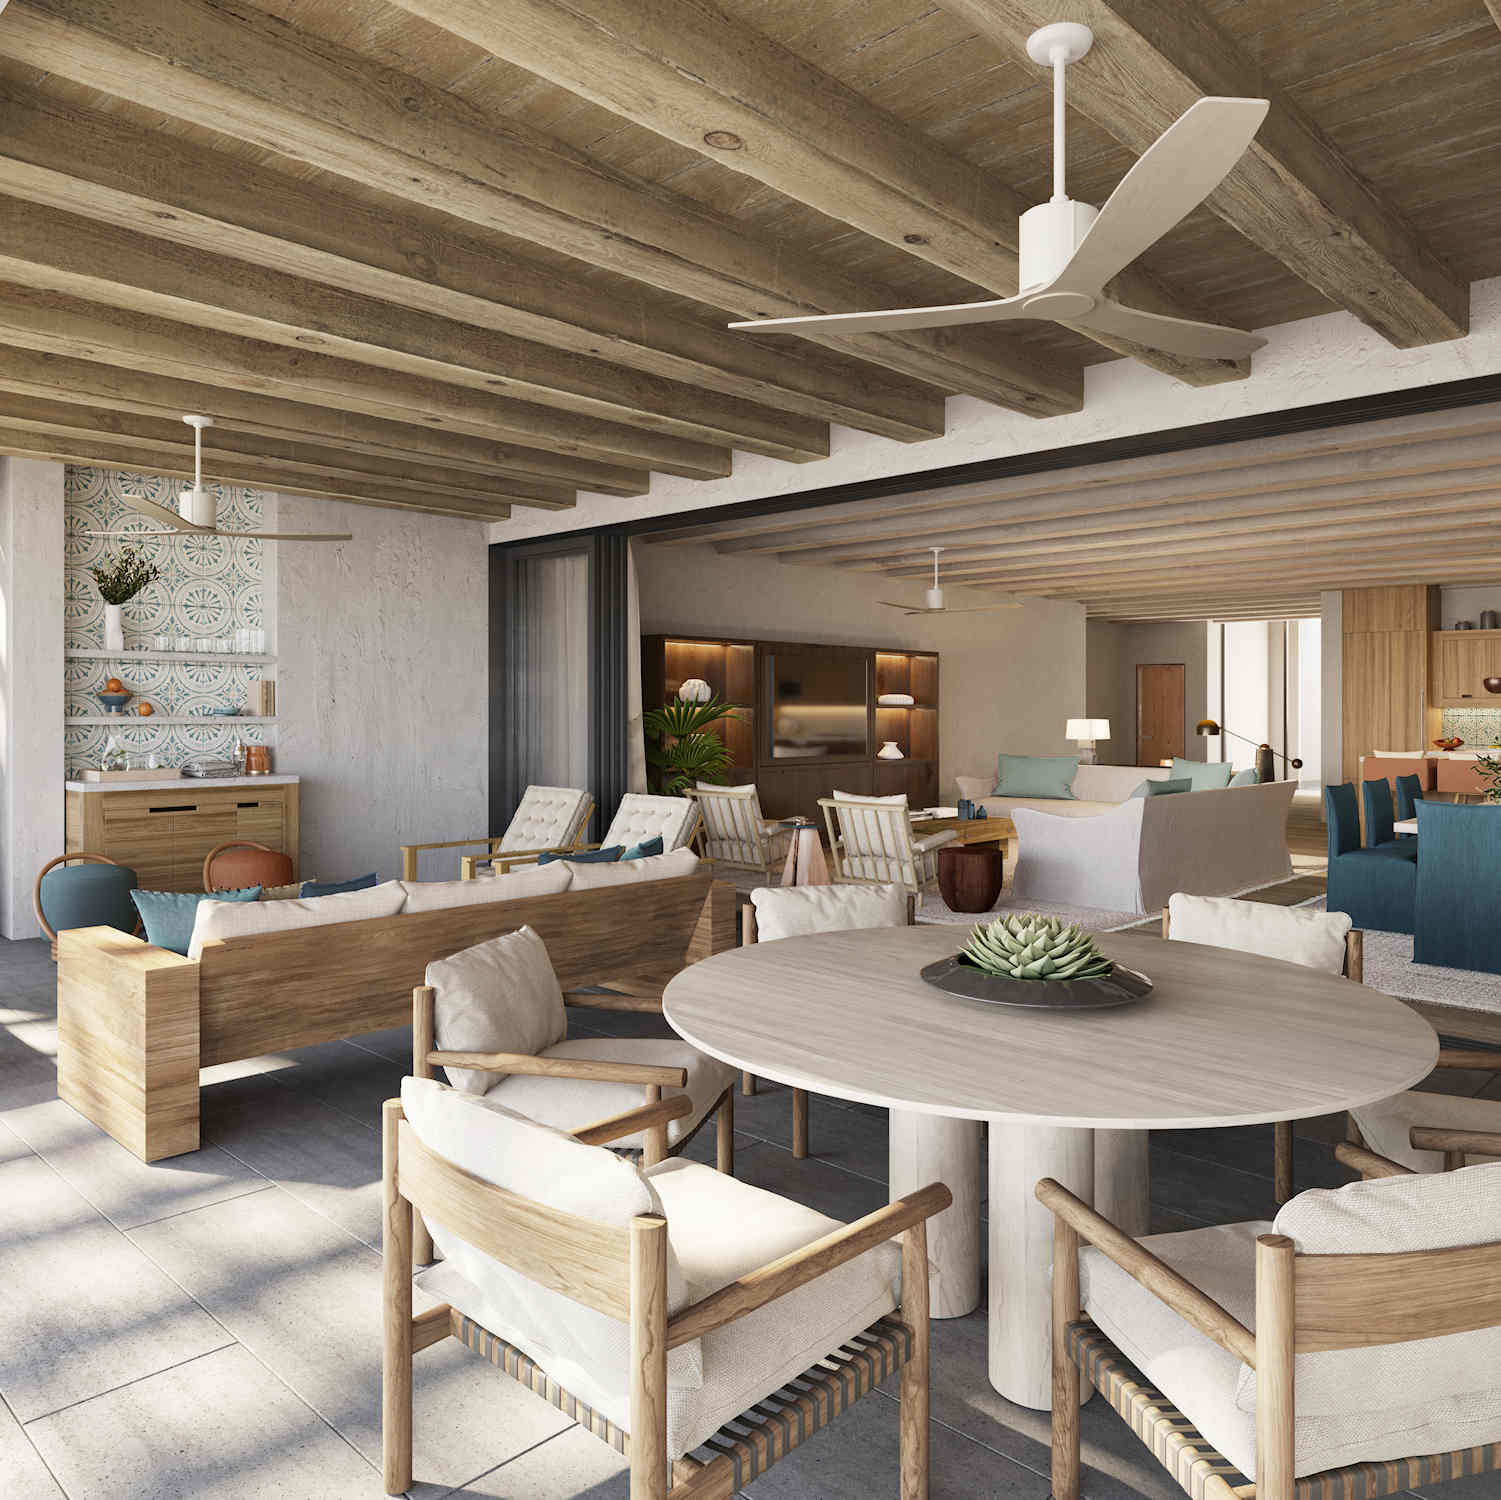 Four Seasons Private Residences Cabo San Lucas at Cabo Del Sol